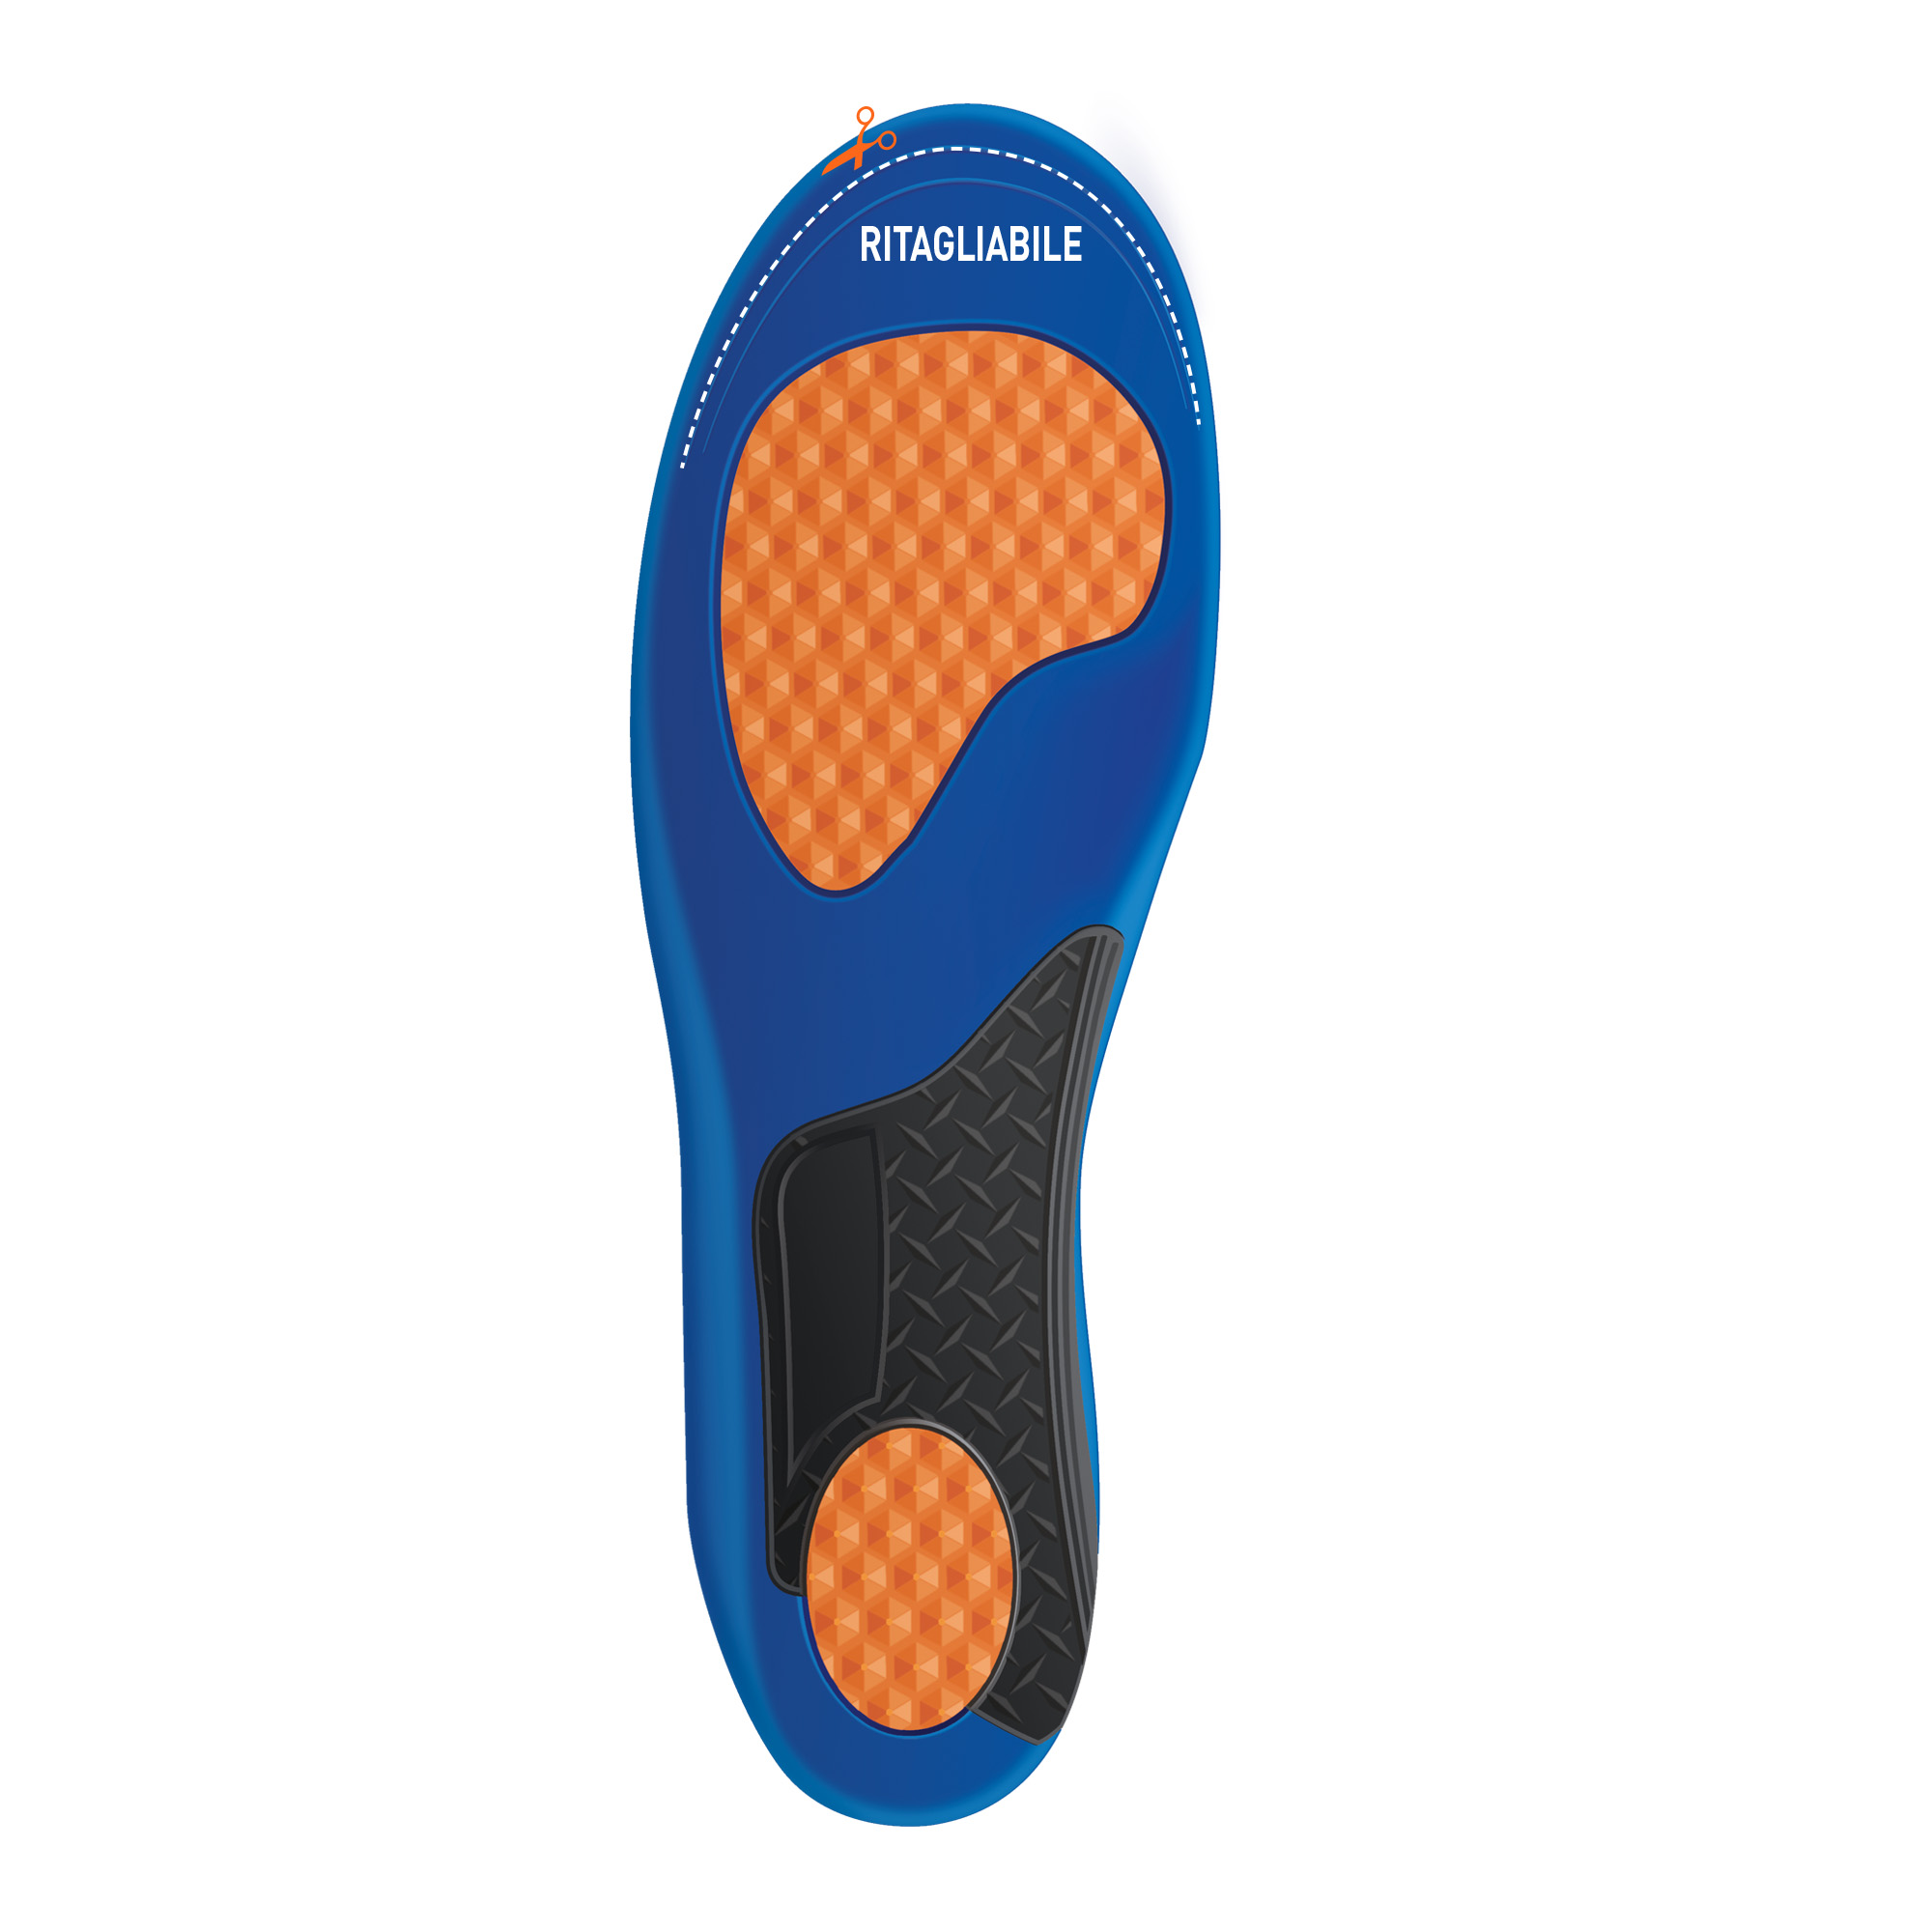 Tecniwork Active Work insoles ideal to be cut to size for work shoes 1 pair